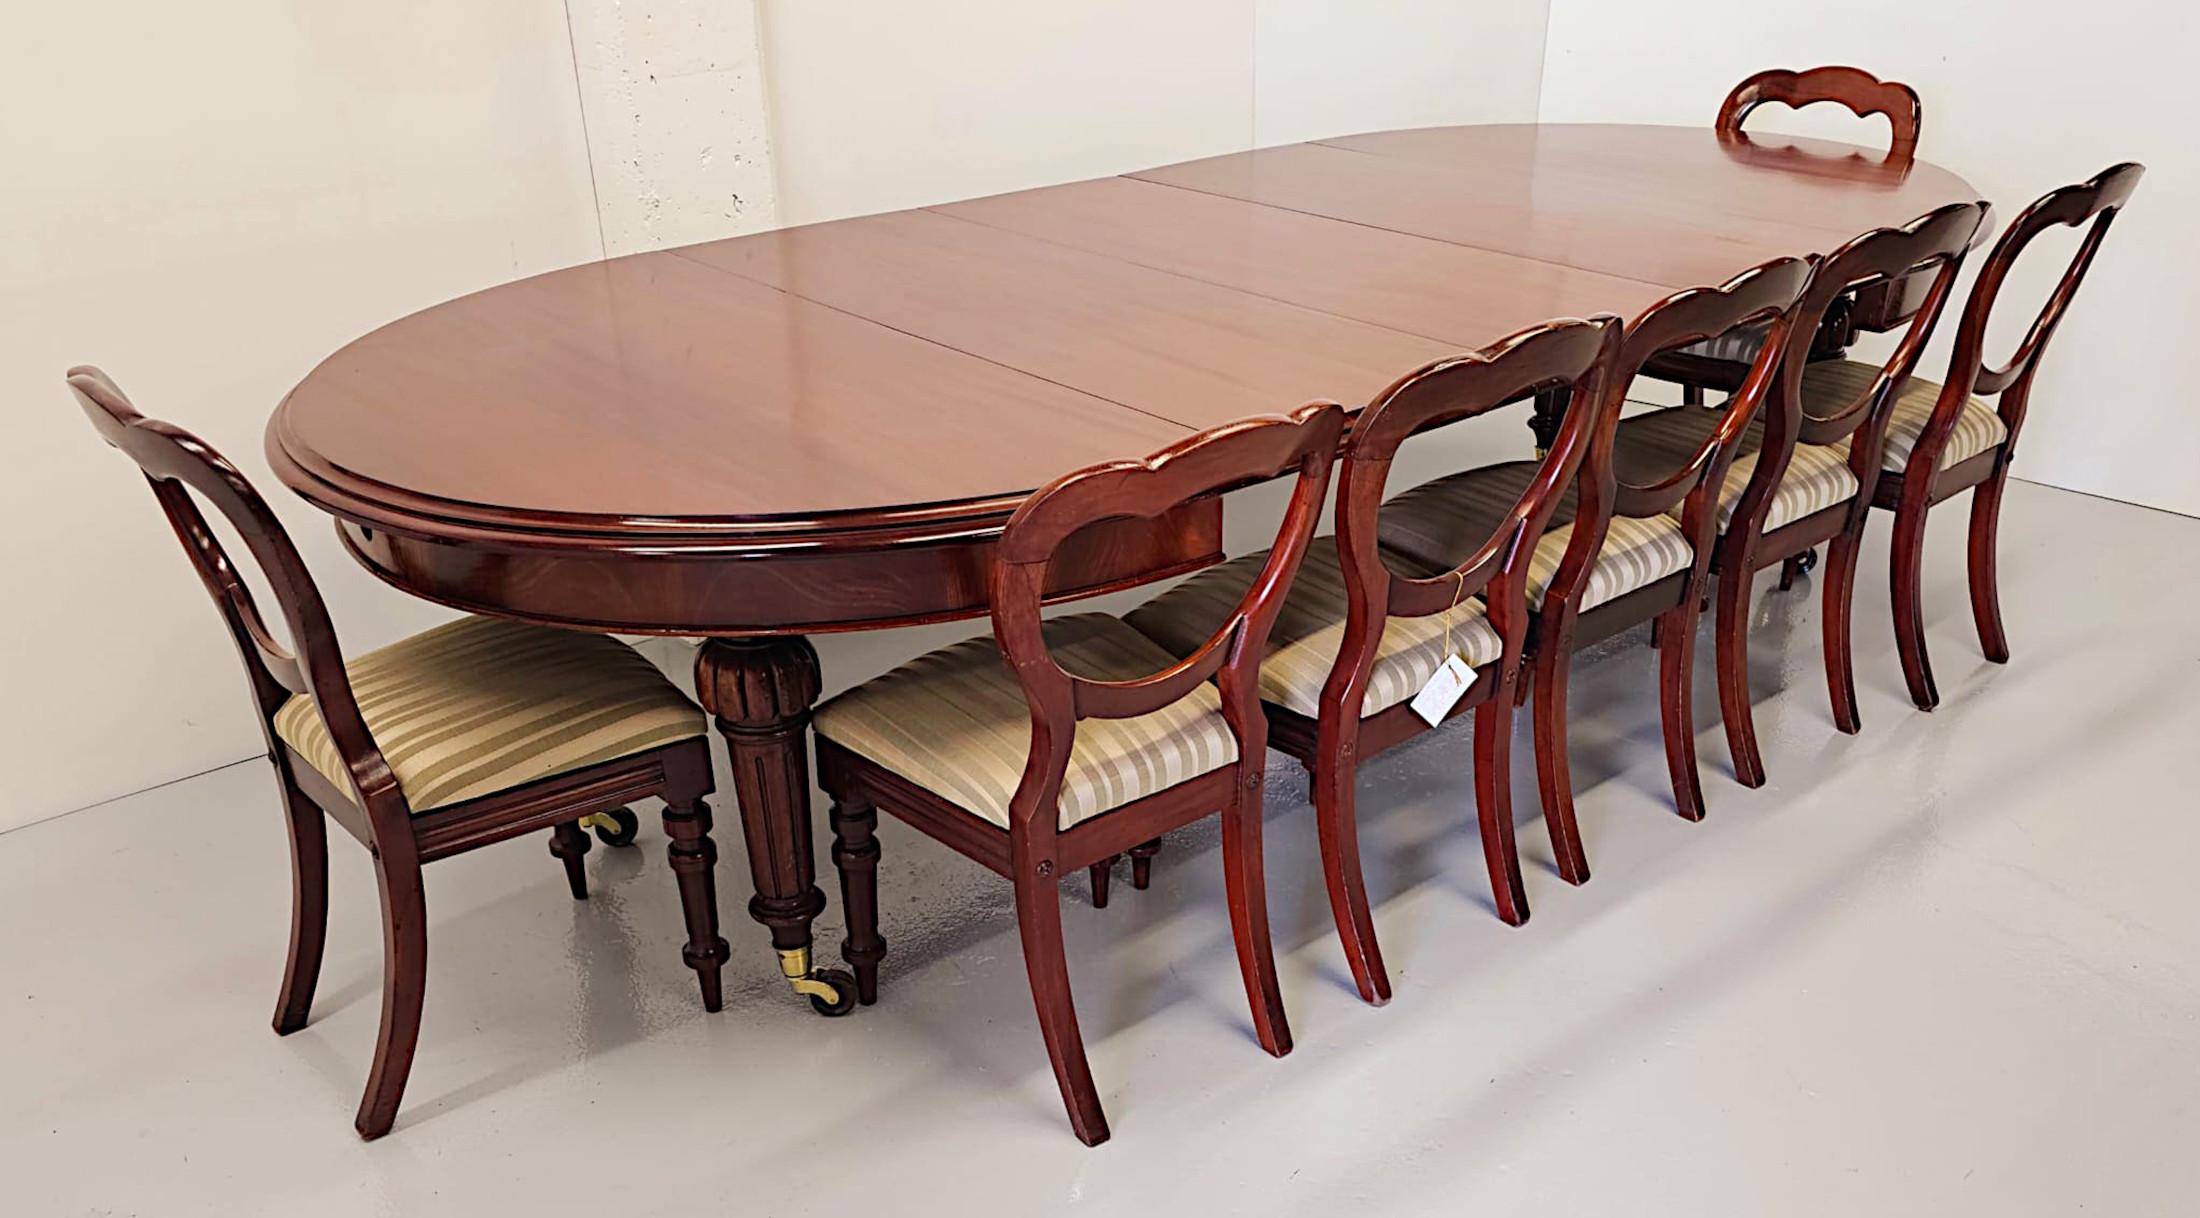 A superb 19th Century mahogany D-end extendable dining table of impressive proportions, finely hand carved and of exceptional quality.  This fine piece is fully restored with beautifully rich patination and grain and features three interchangeable